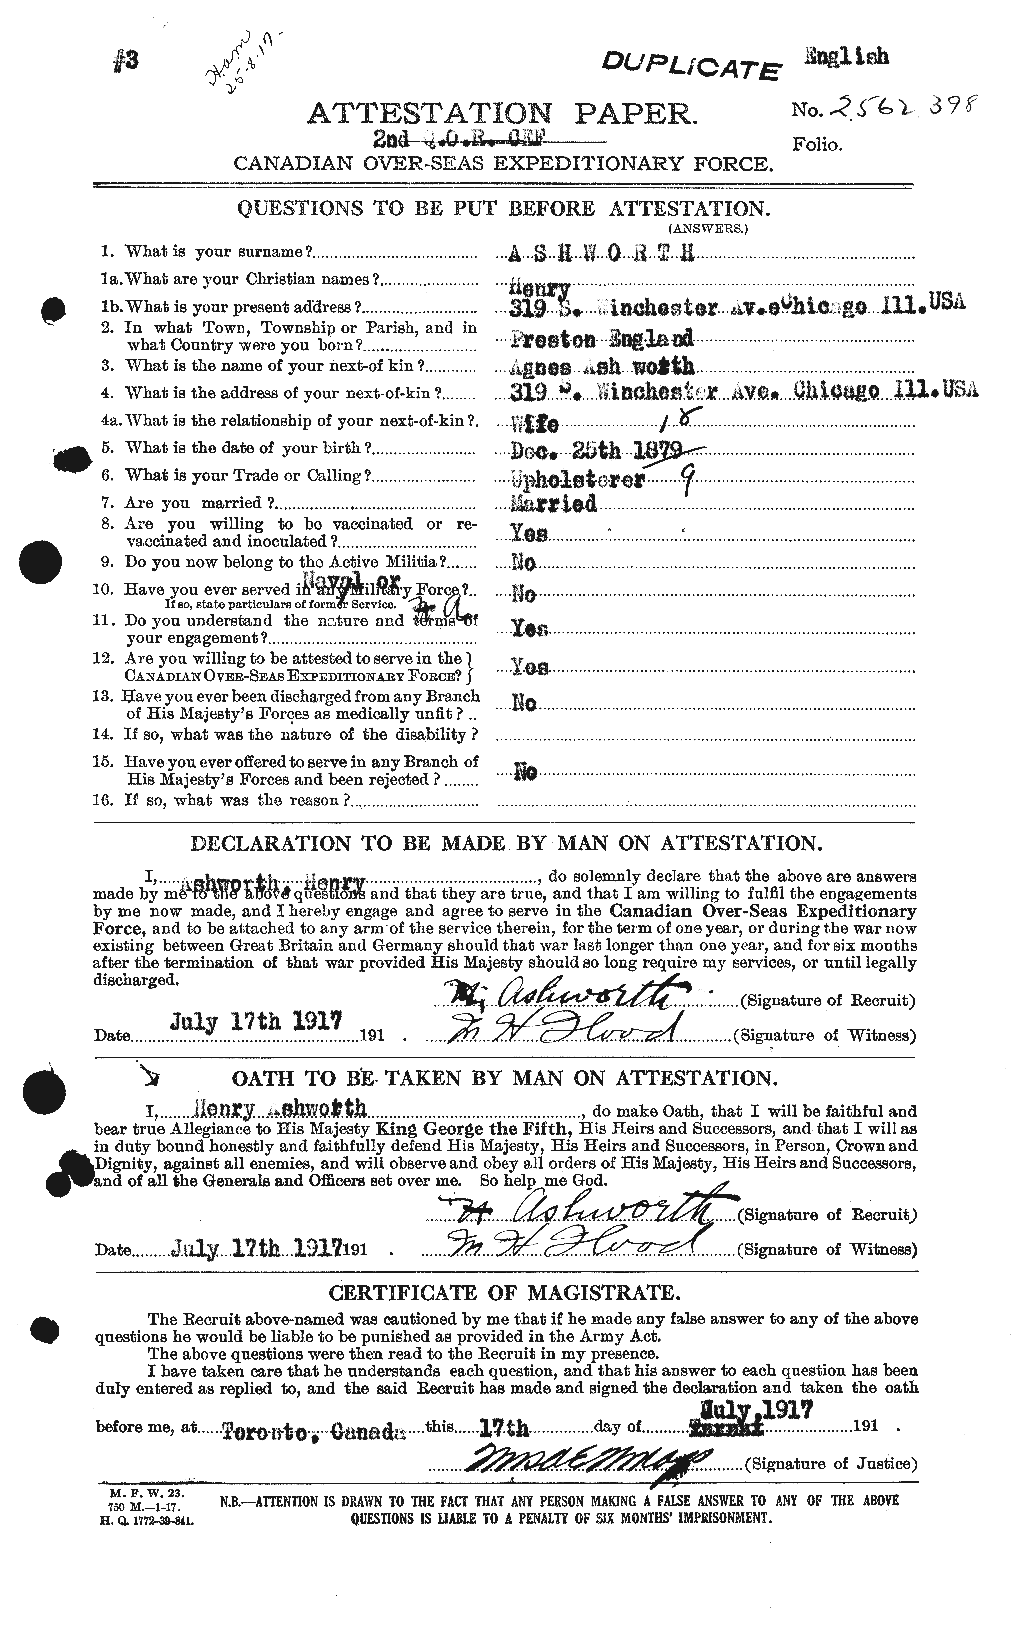 Personnel Records of the First World War - CEF 223730a